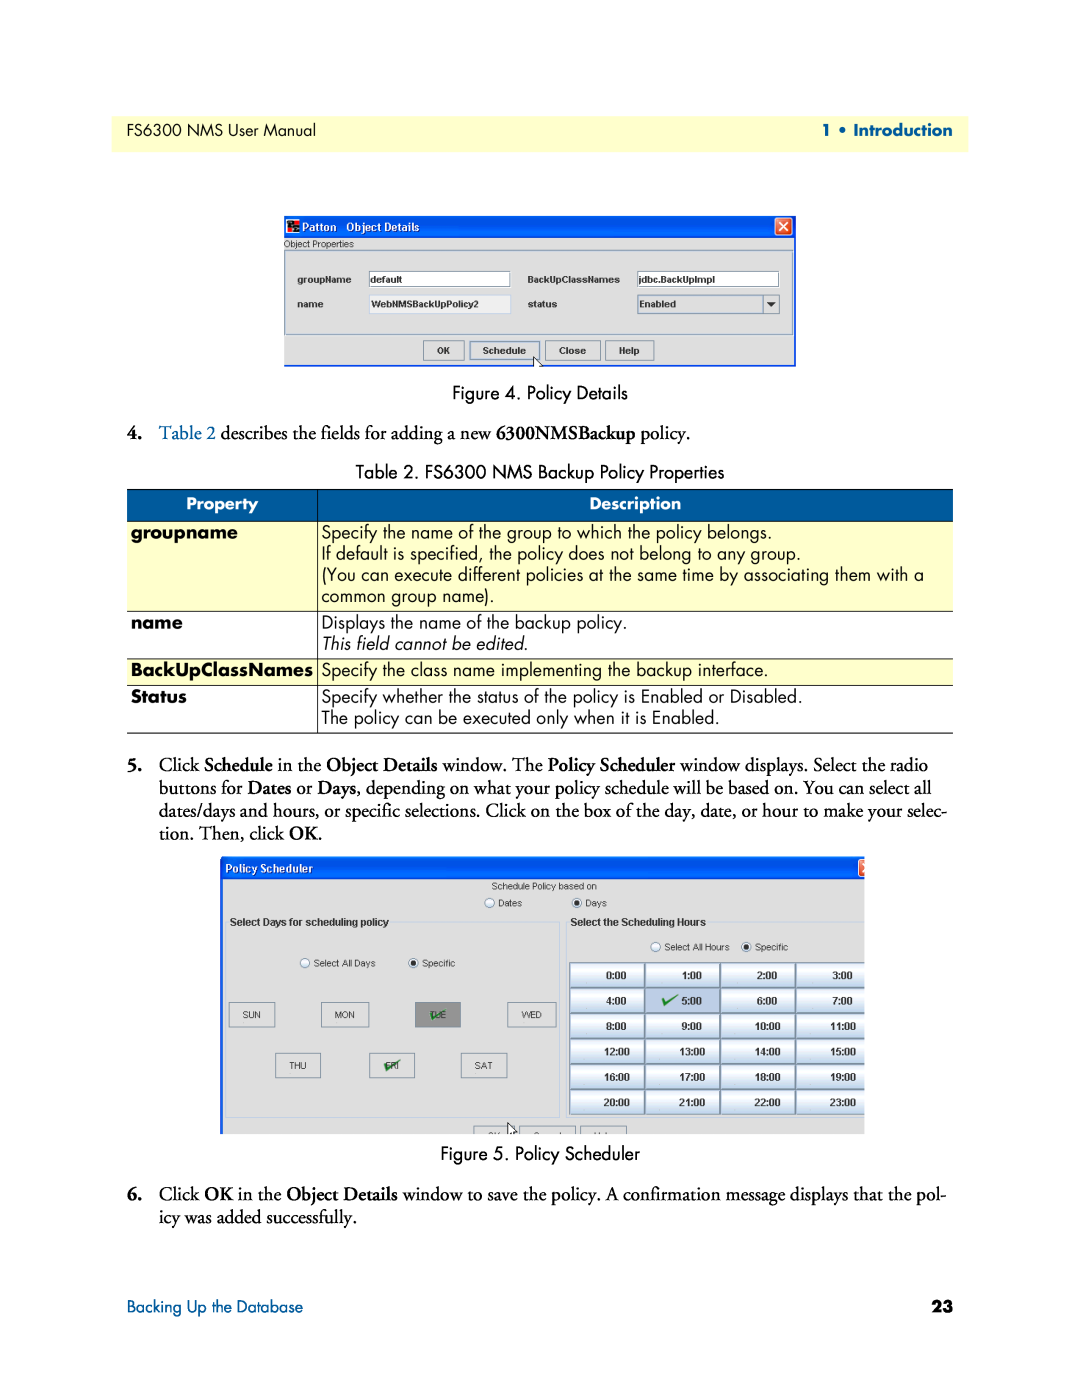 Patton electronic user manual describes the fields for adding a new 6300NMSBackup policy 